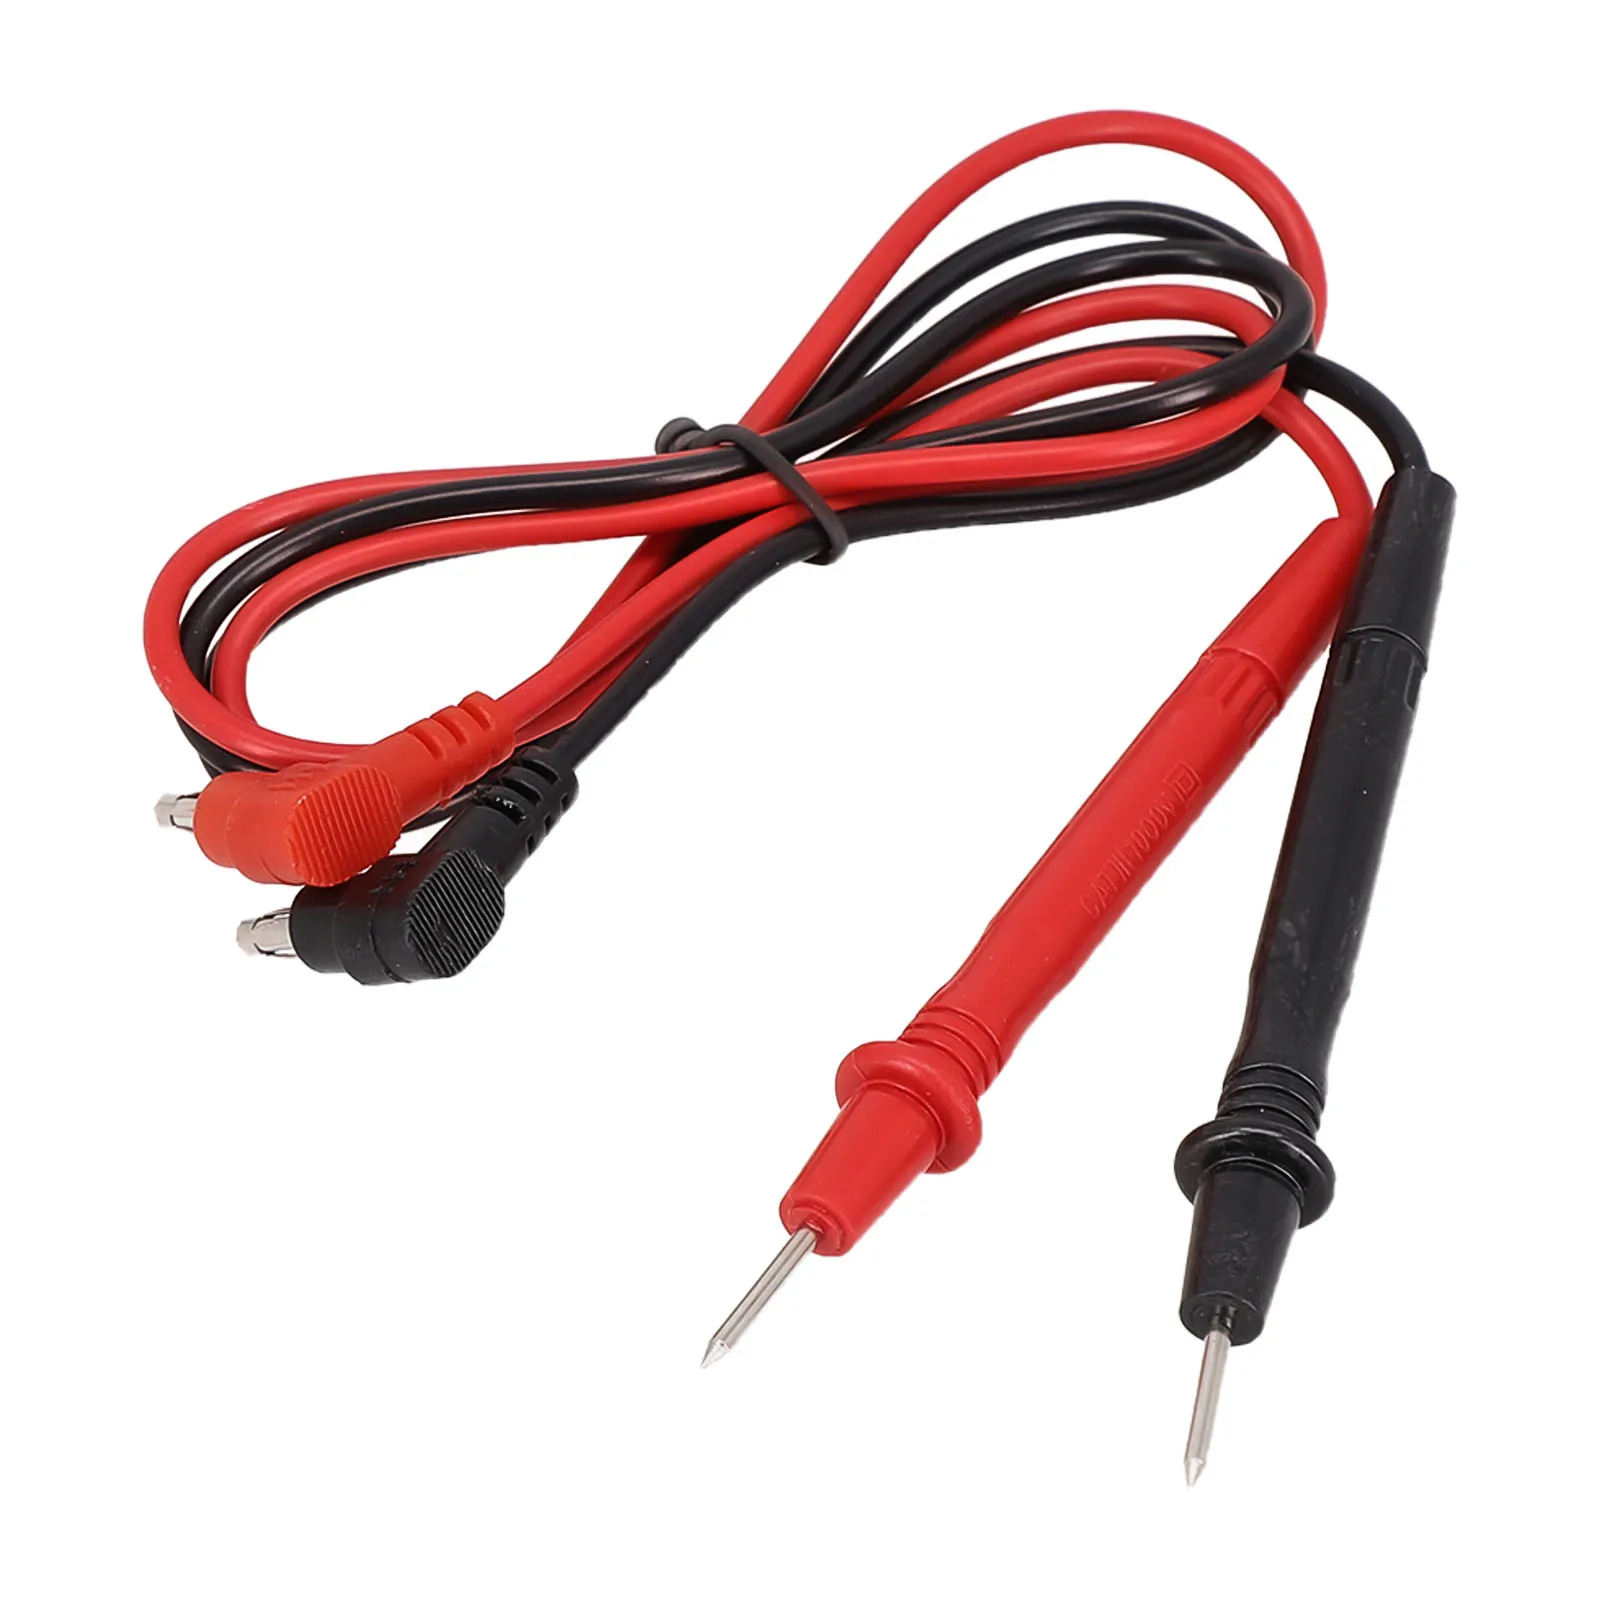 

70cm Length 1 Pair Universal 1000v 10A Probe Multimeter Test Leads For Digital Multi Meter Tester Lead Probe Wire Pen Cable Tool